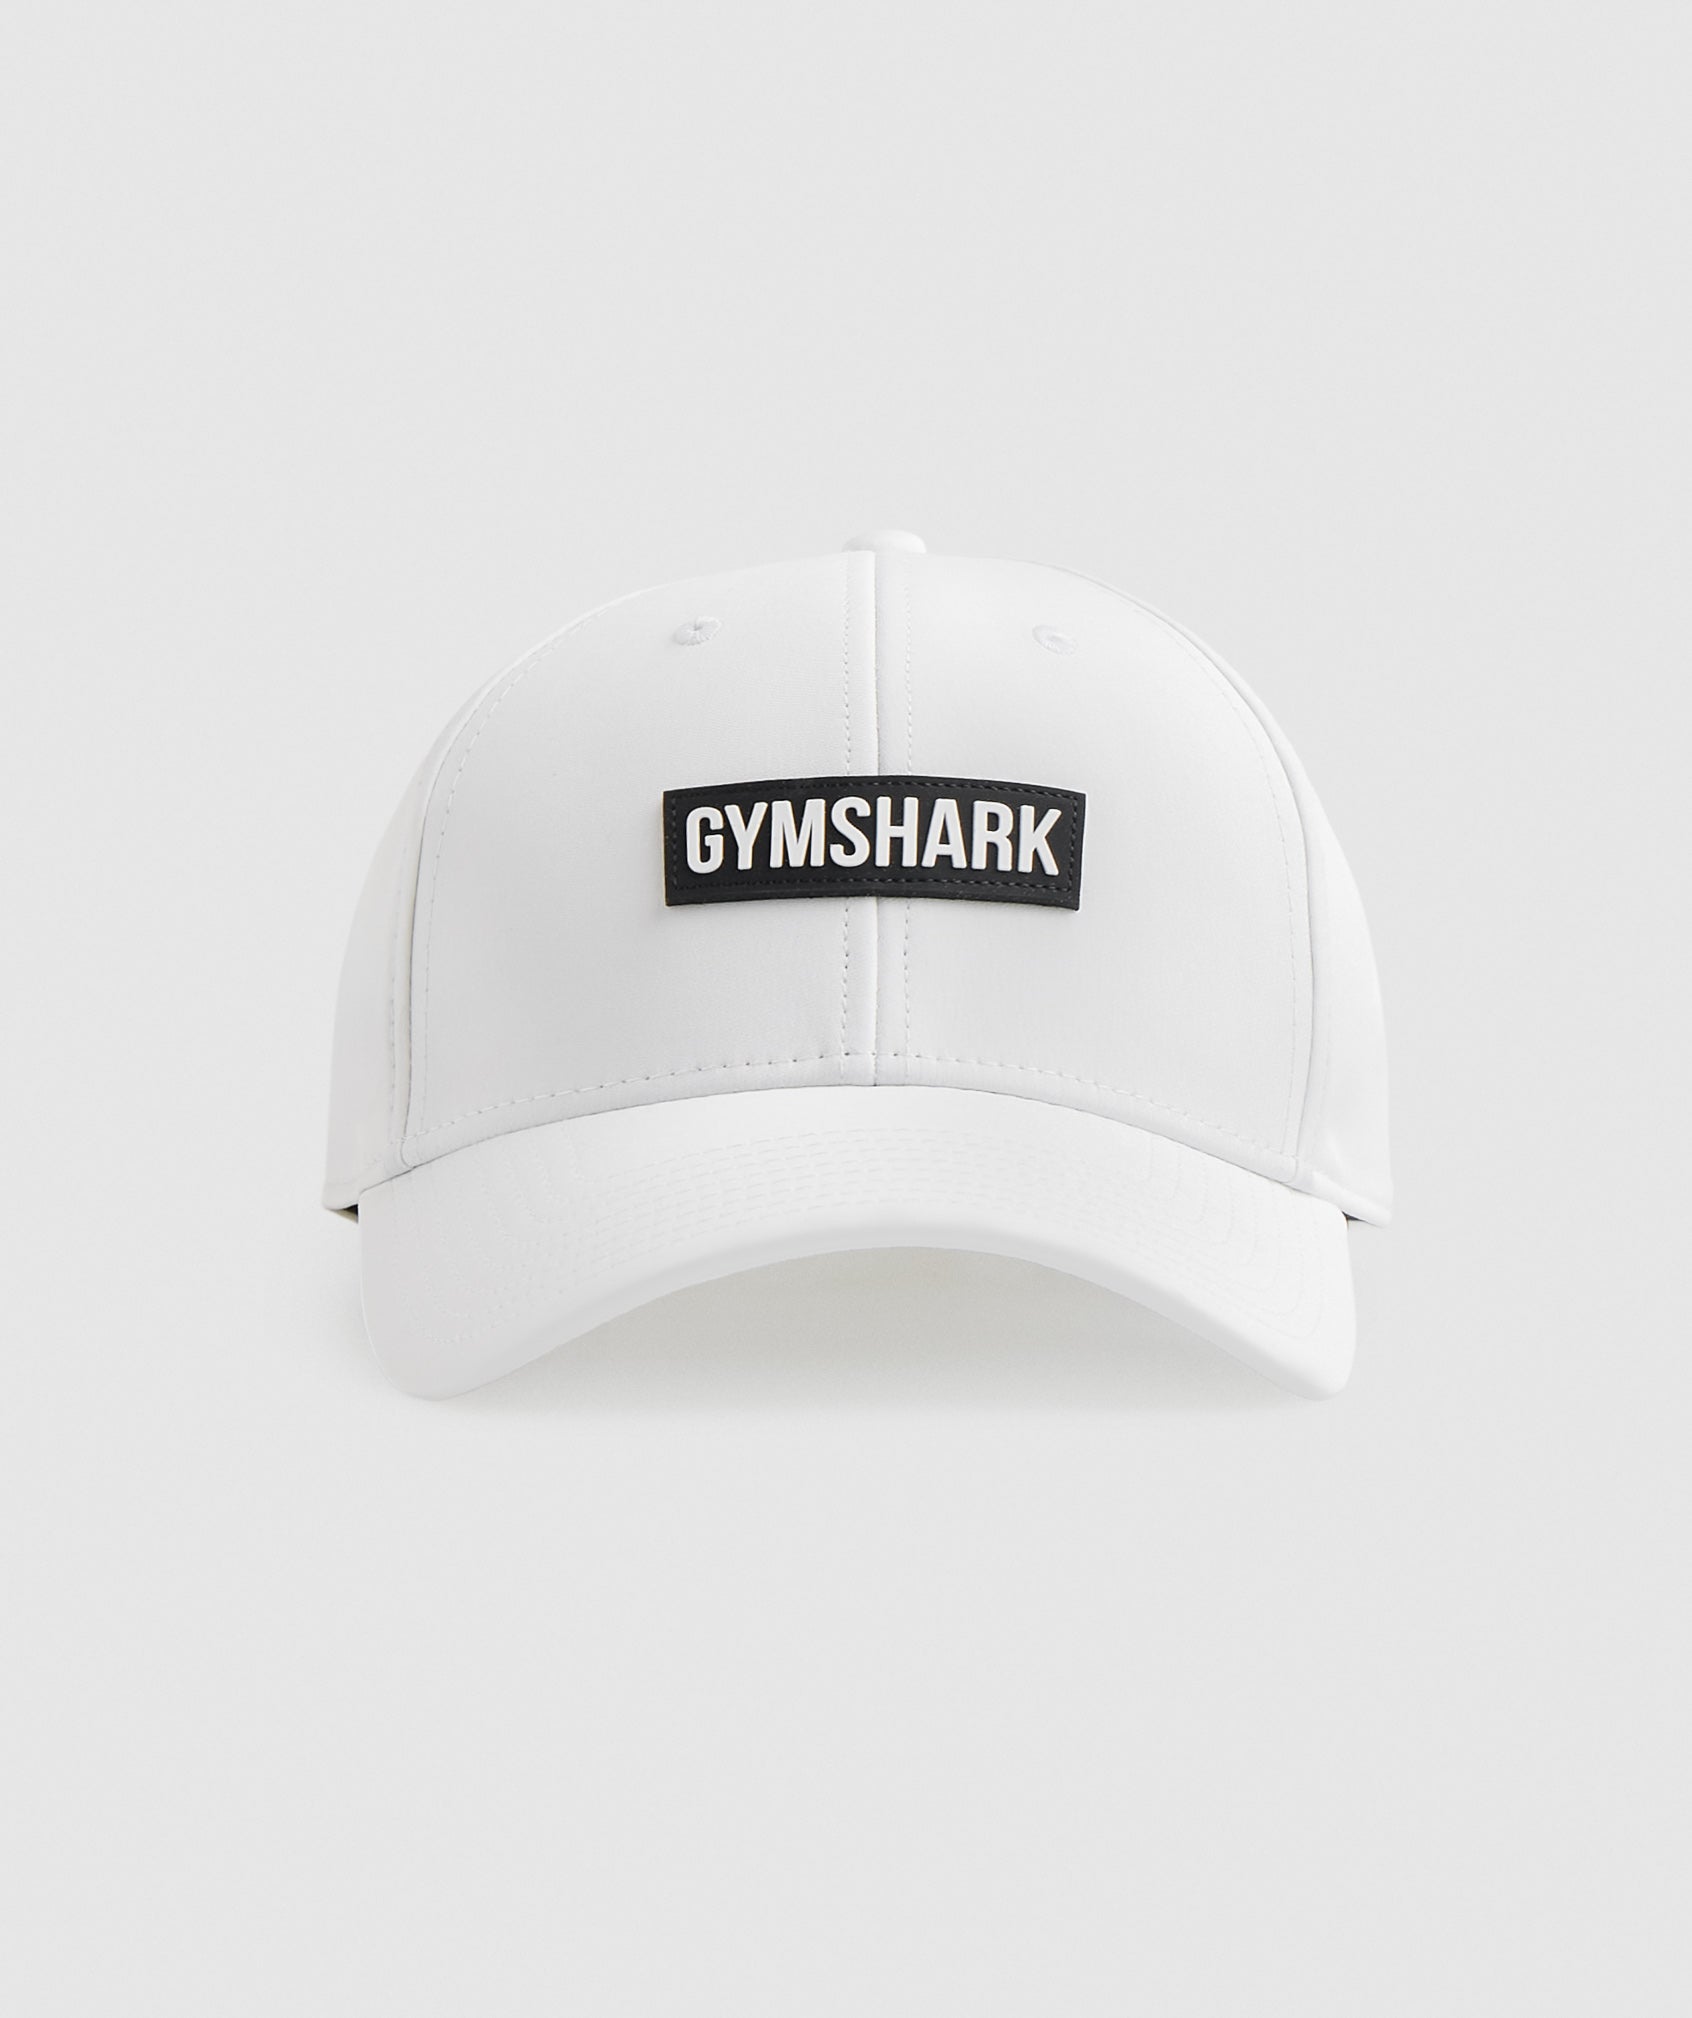 Snapback in White - view 3